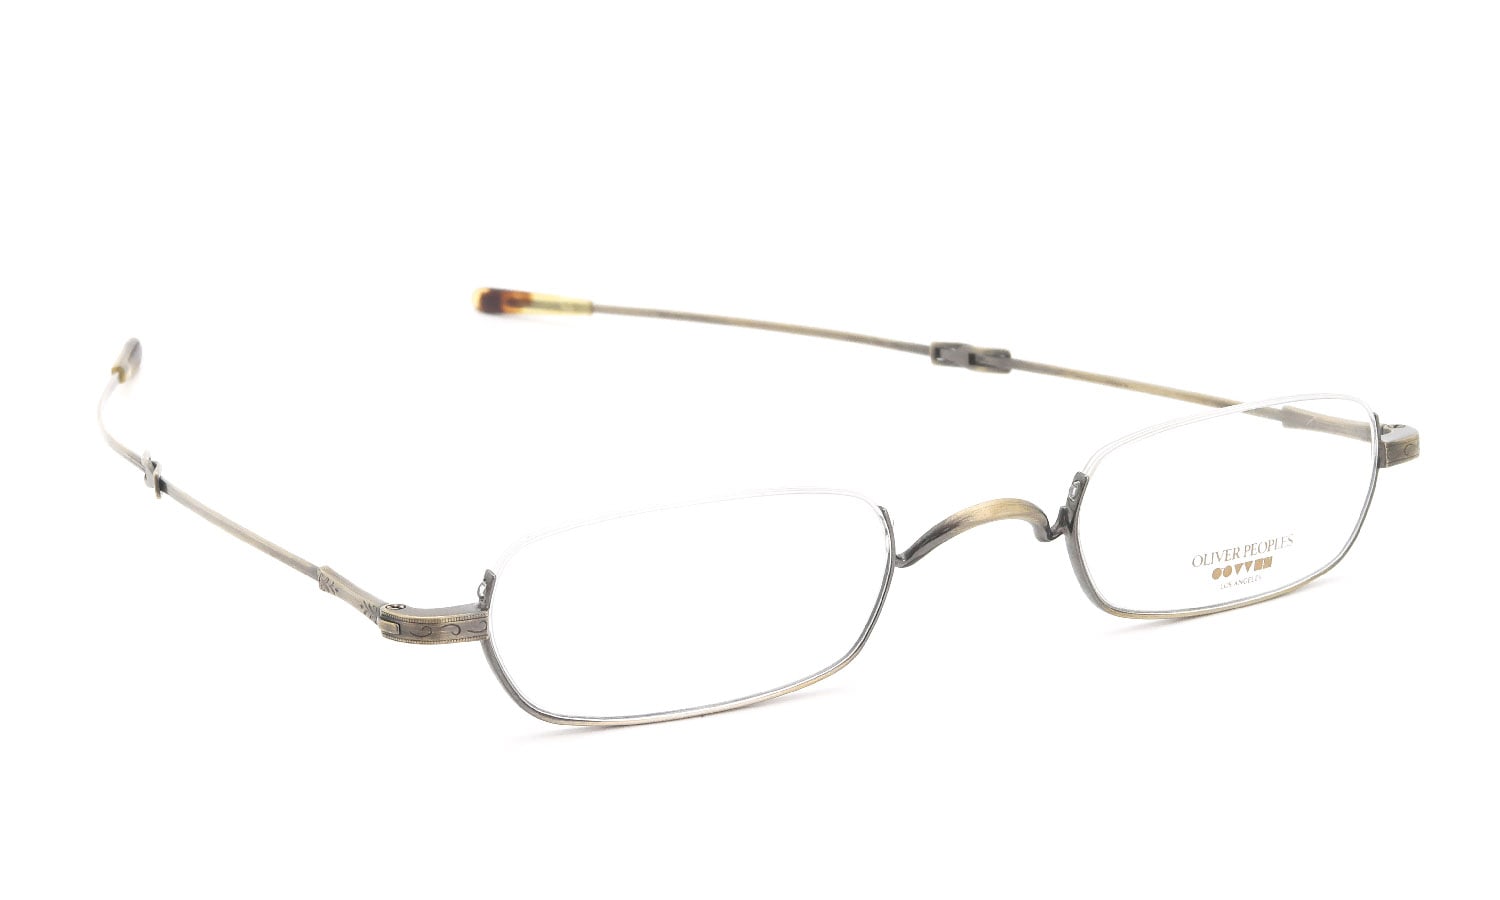 OLIVER PEOPLES archive 伸縮メガネ通販 1990's- OP-662 AG (生産 